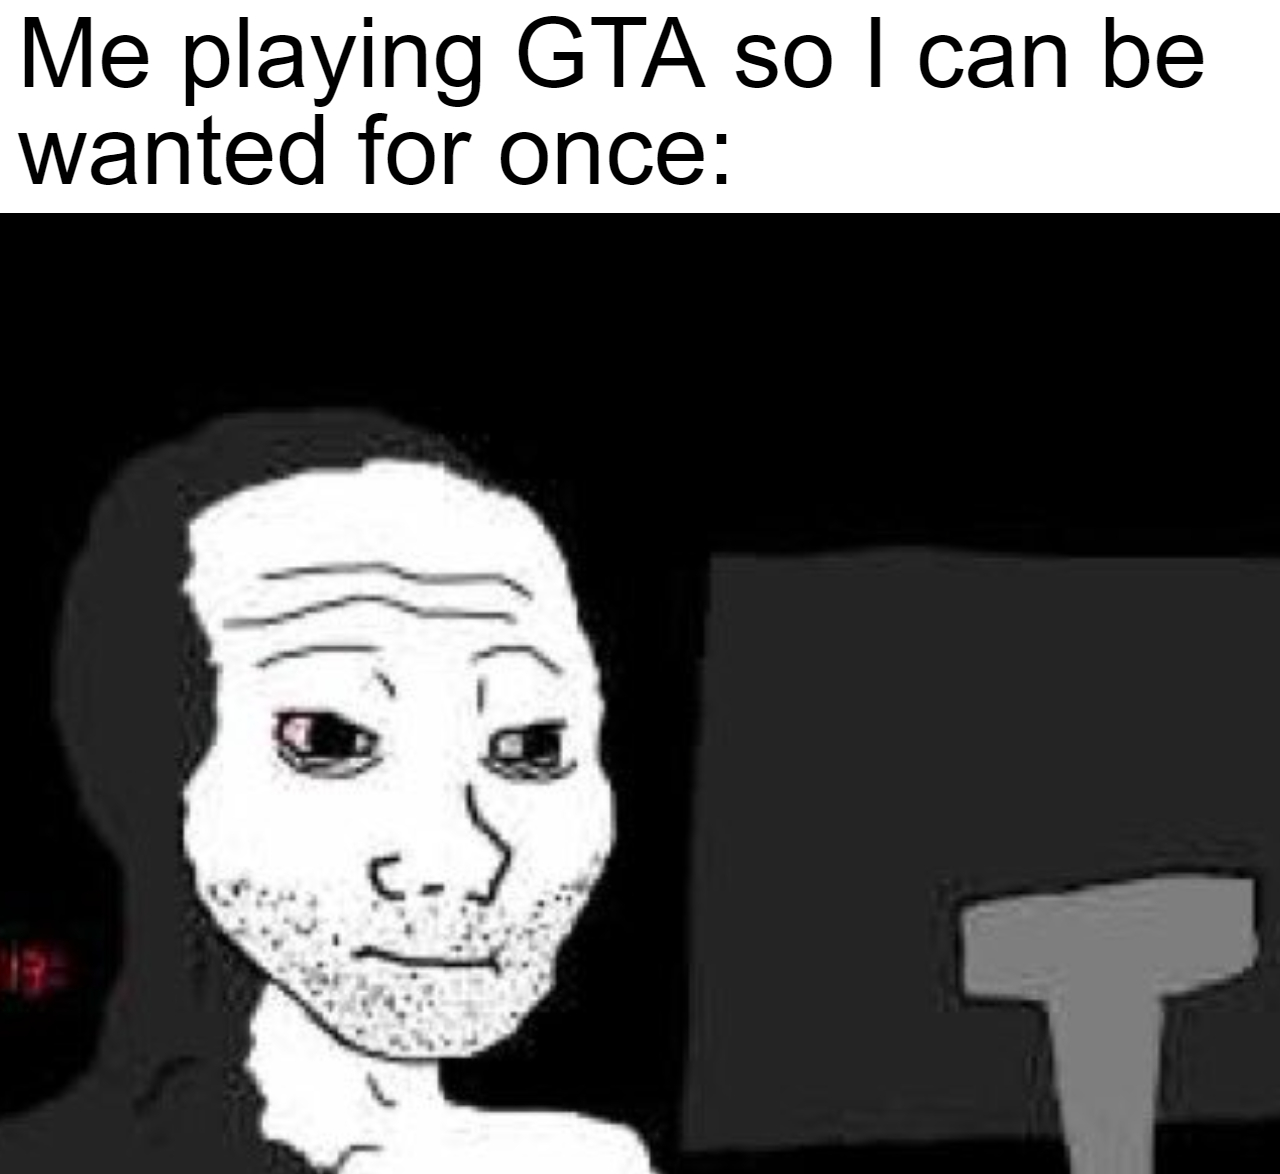 wojak 4am - Me playing Gta so I can be wanted for once T